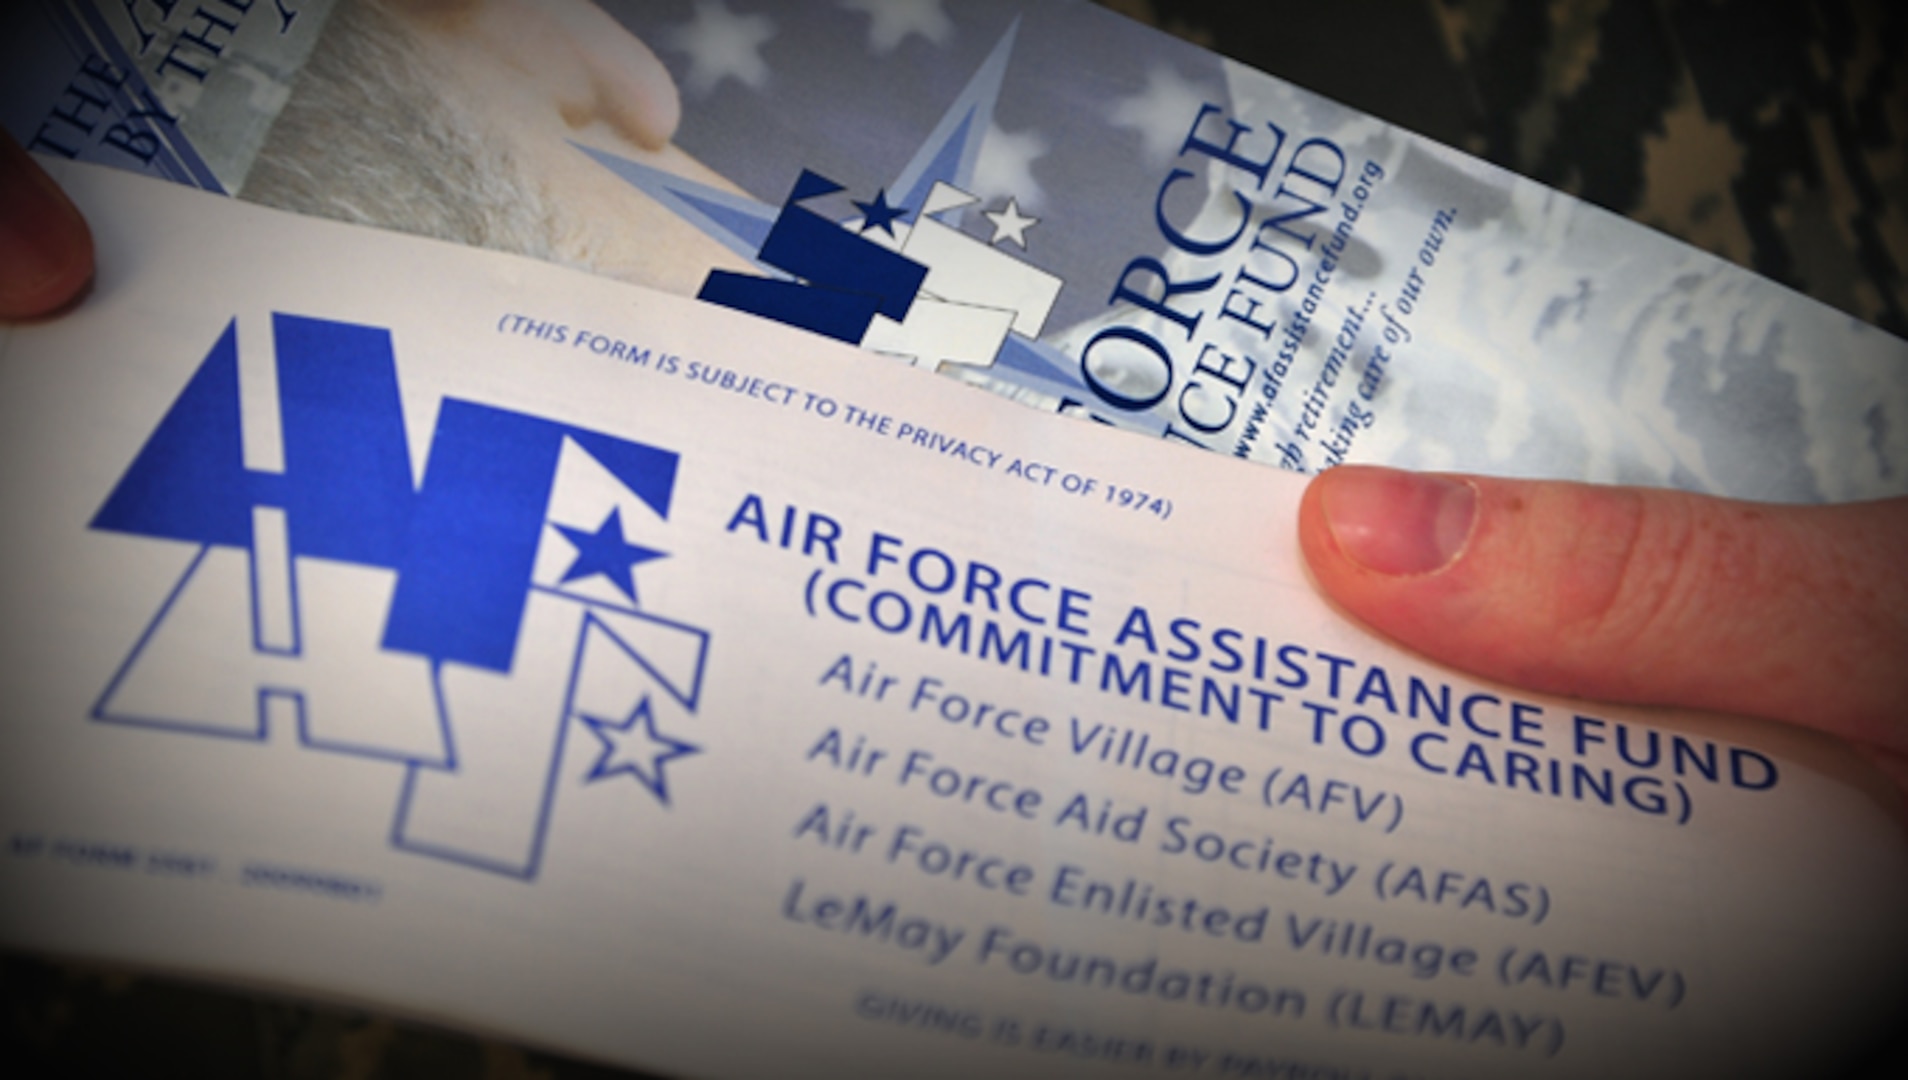 The 2018 Air Force Assistance Fund campaign runs from March 26 to May 4.The AFAF has four different charities: the Air Force Aid Society, Air Force Enlisted Village, Air Force Villages Charitable Foundation and the General and Mrs. Curtis E. LeMay Foundation.